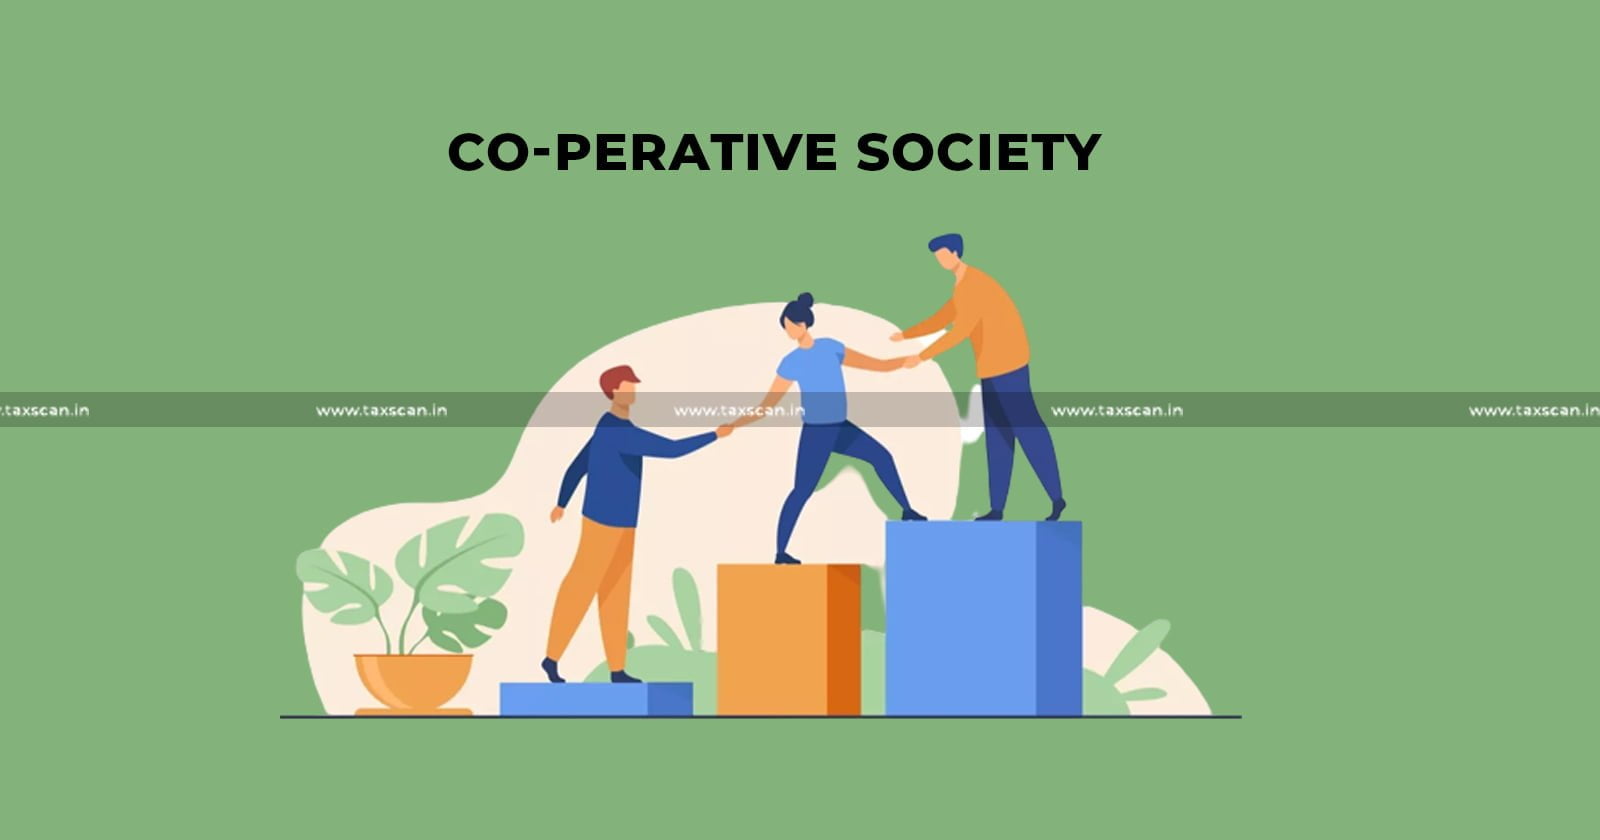 Co-operative society - Interest - deposits - Co-operative bank - claim of Deduction - taxscan